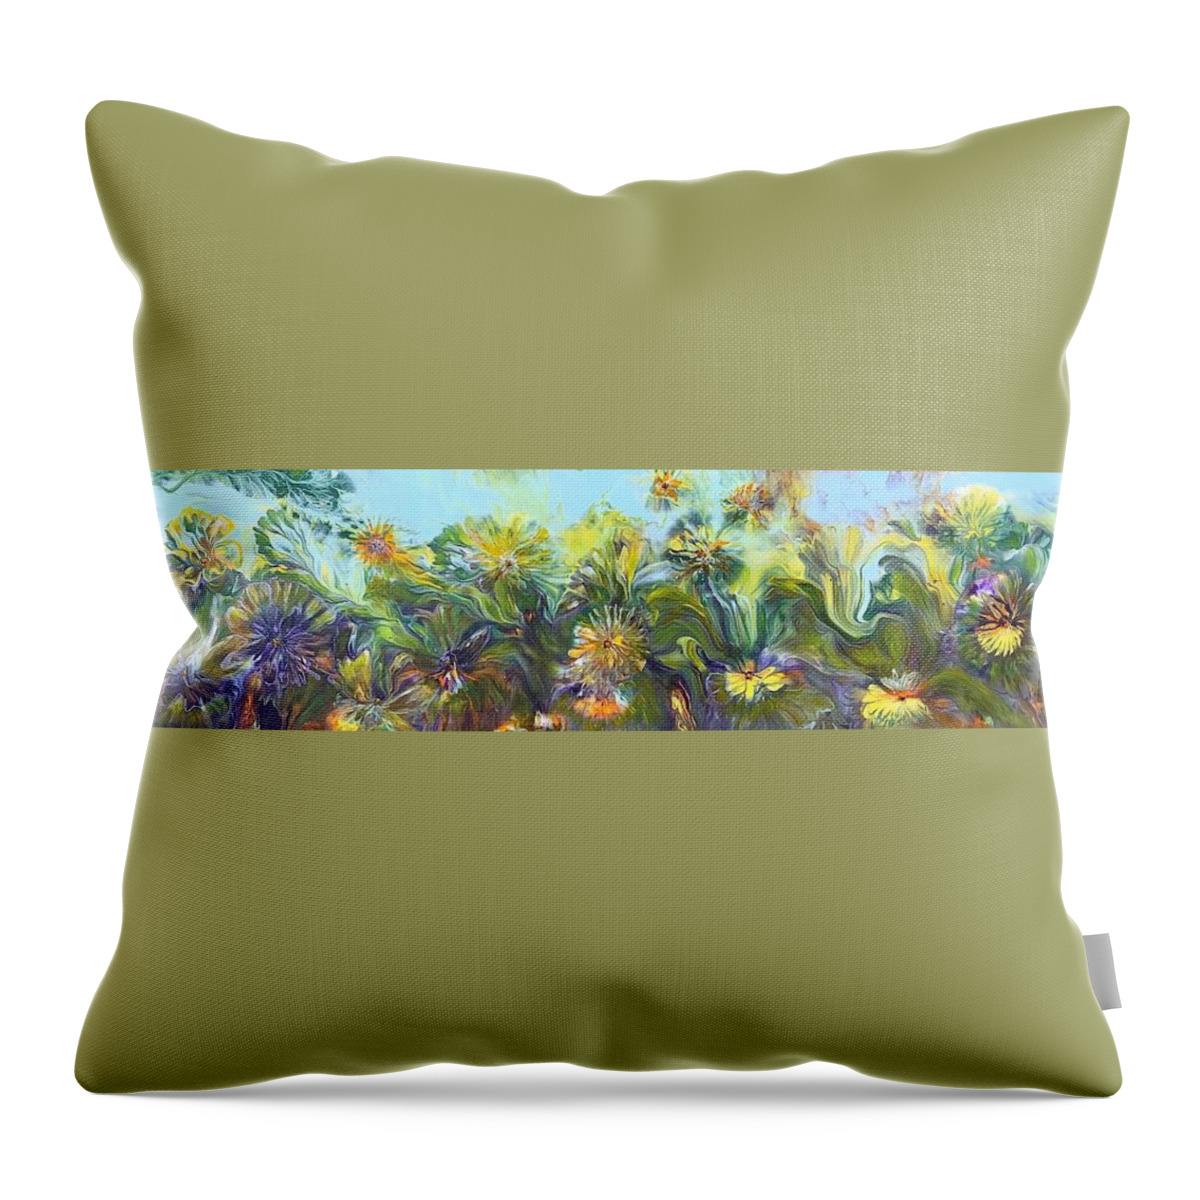 Spring Throw Pillow featuring the painting Spring Garden by Soraya Silvestri